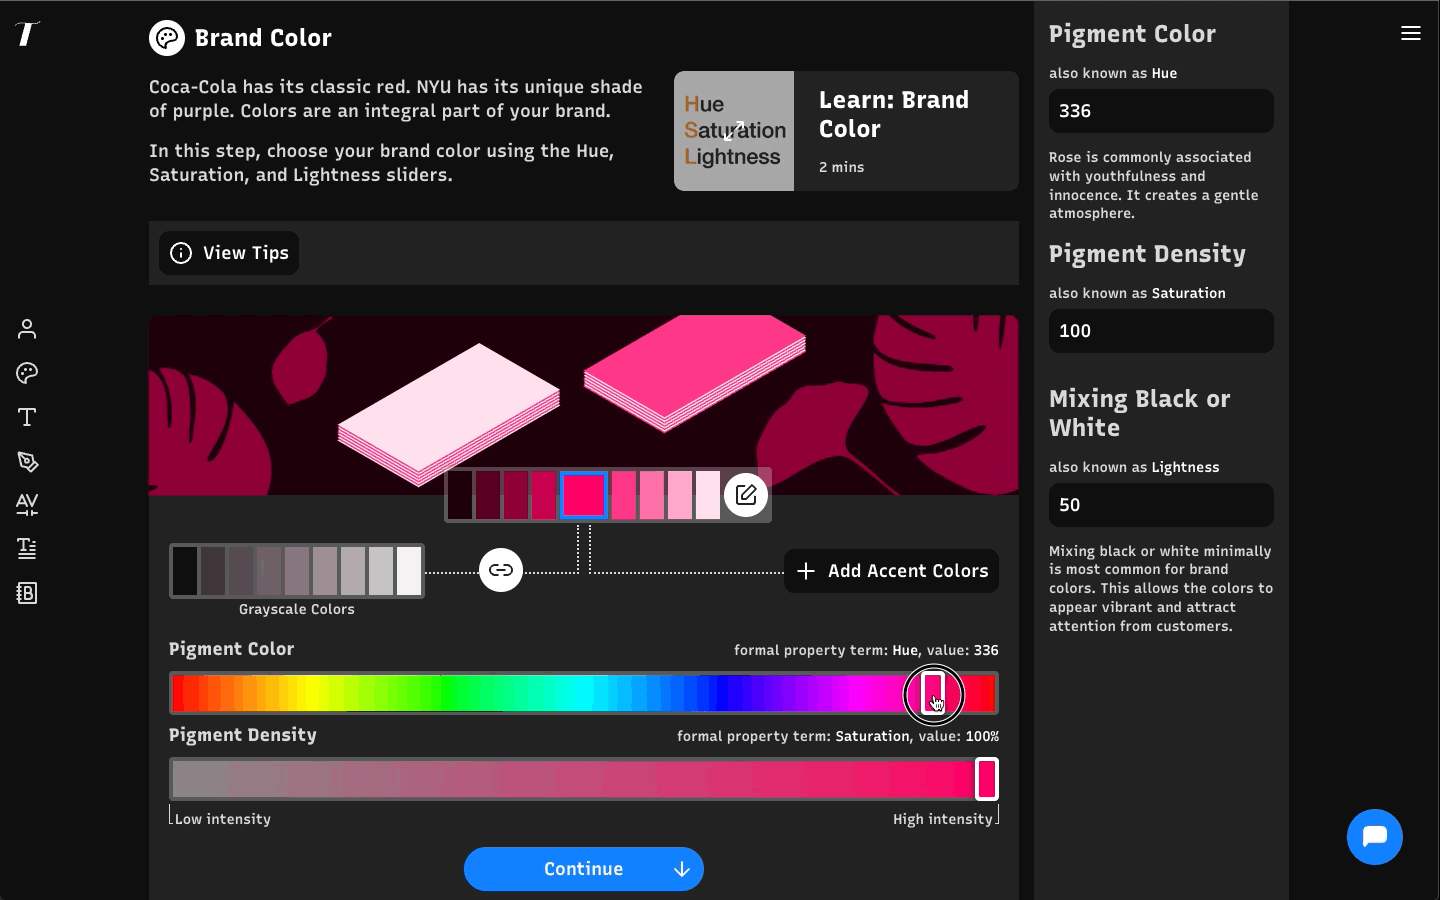 Img: Info panel also has information about the selected color and their hue, saturation, lightness values